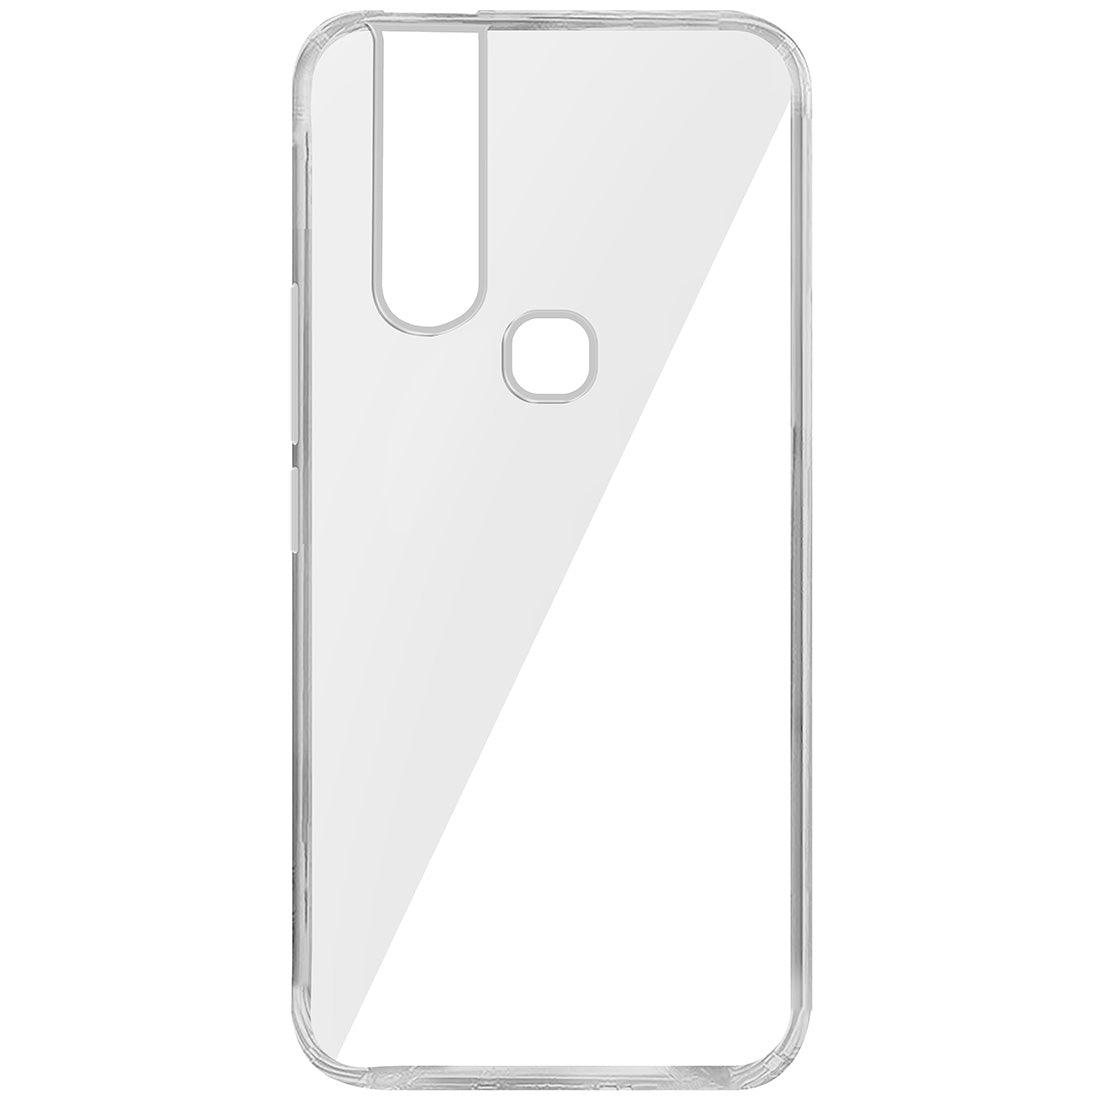 Clear Case for Infinix S5 Pro